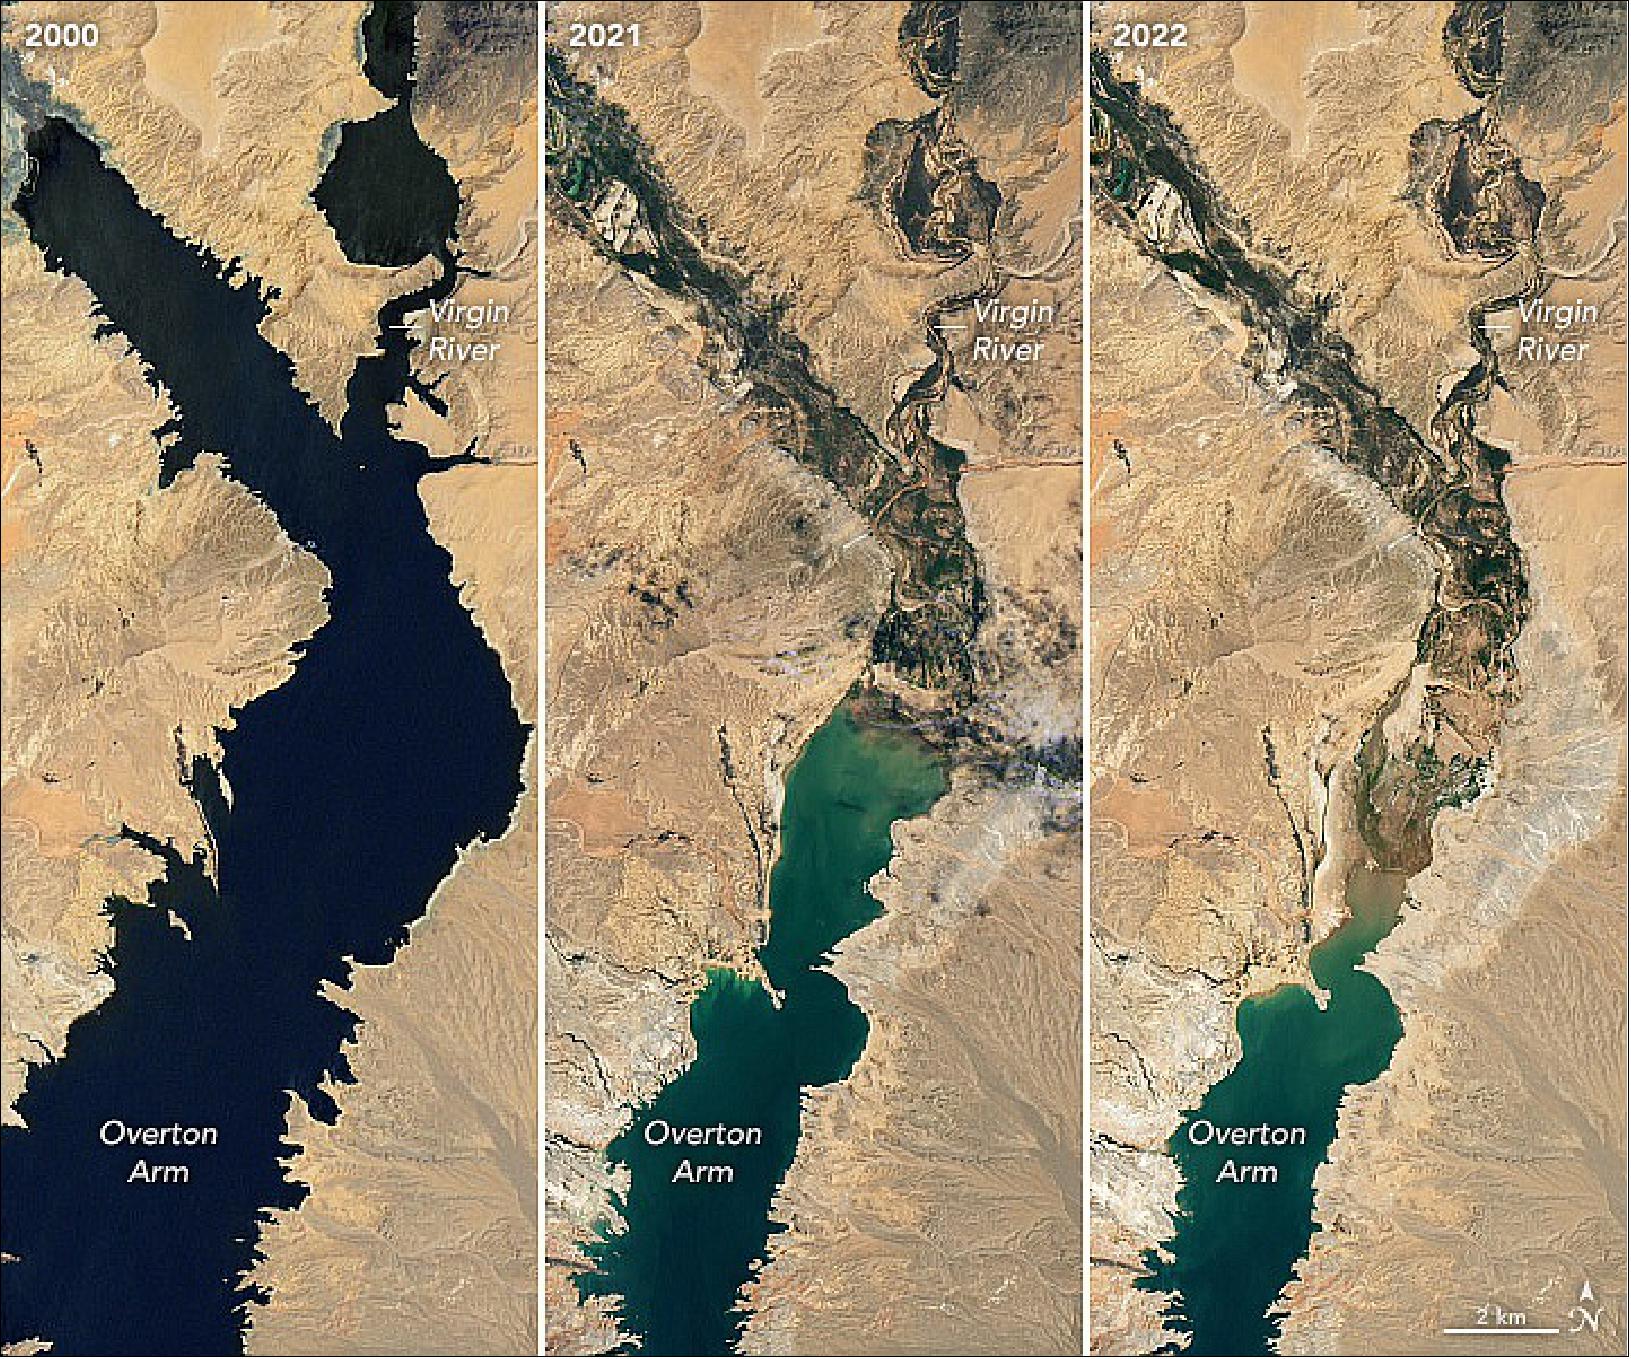 Figure 15: These detailed images also include a view from Landsat 8 on July 8, 2021 (middle). The light-colored fringes along the shorelines in 2021 and 2022 are mineralized areas of the lakeshore that were formerly underwater when the reservoir was filled closer to capacity. The phenomenon is often referred to as a “bathtub ring.” (image credit: NASA Earth Observatory)